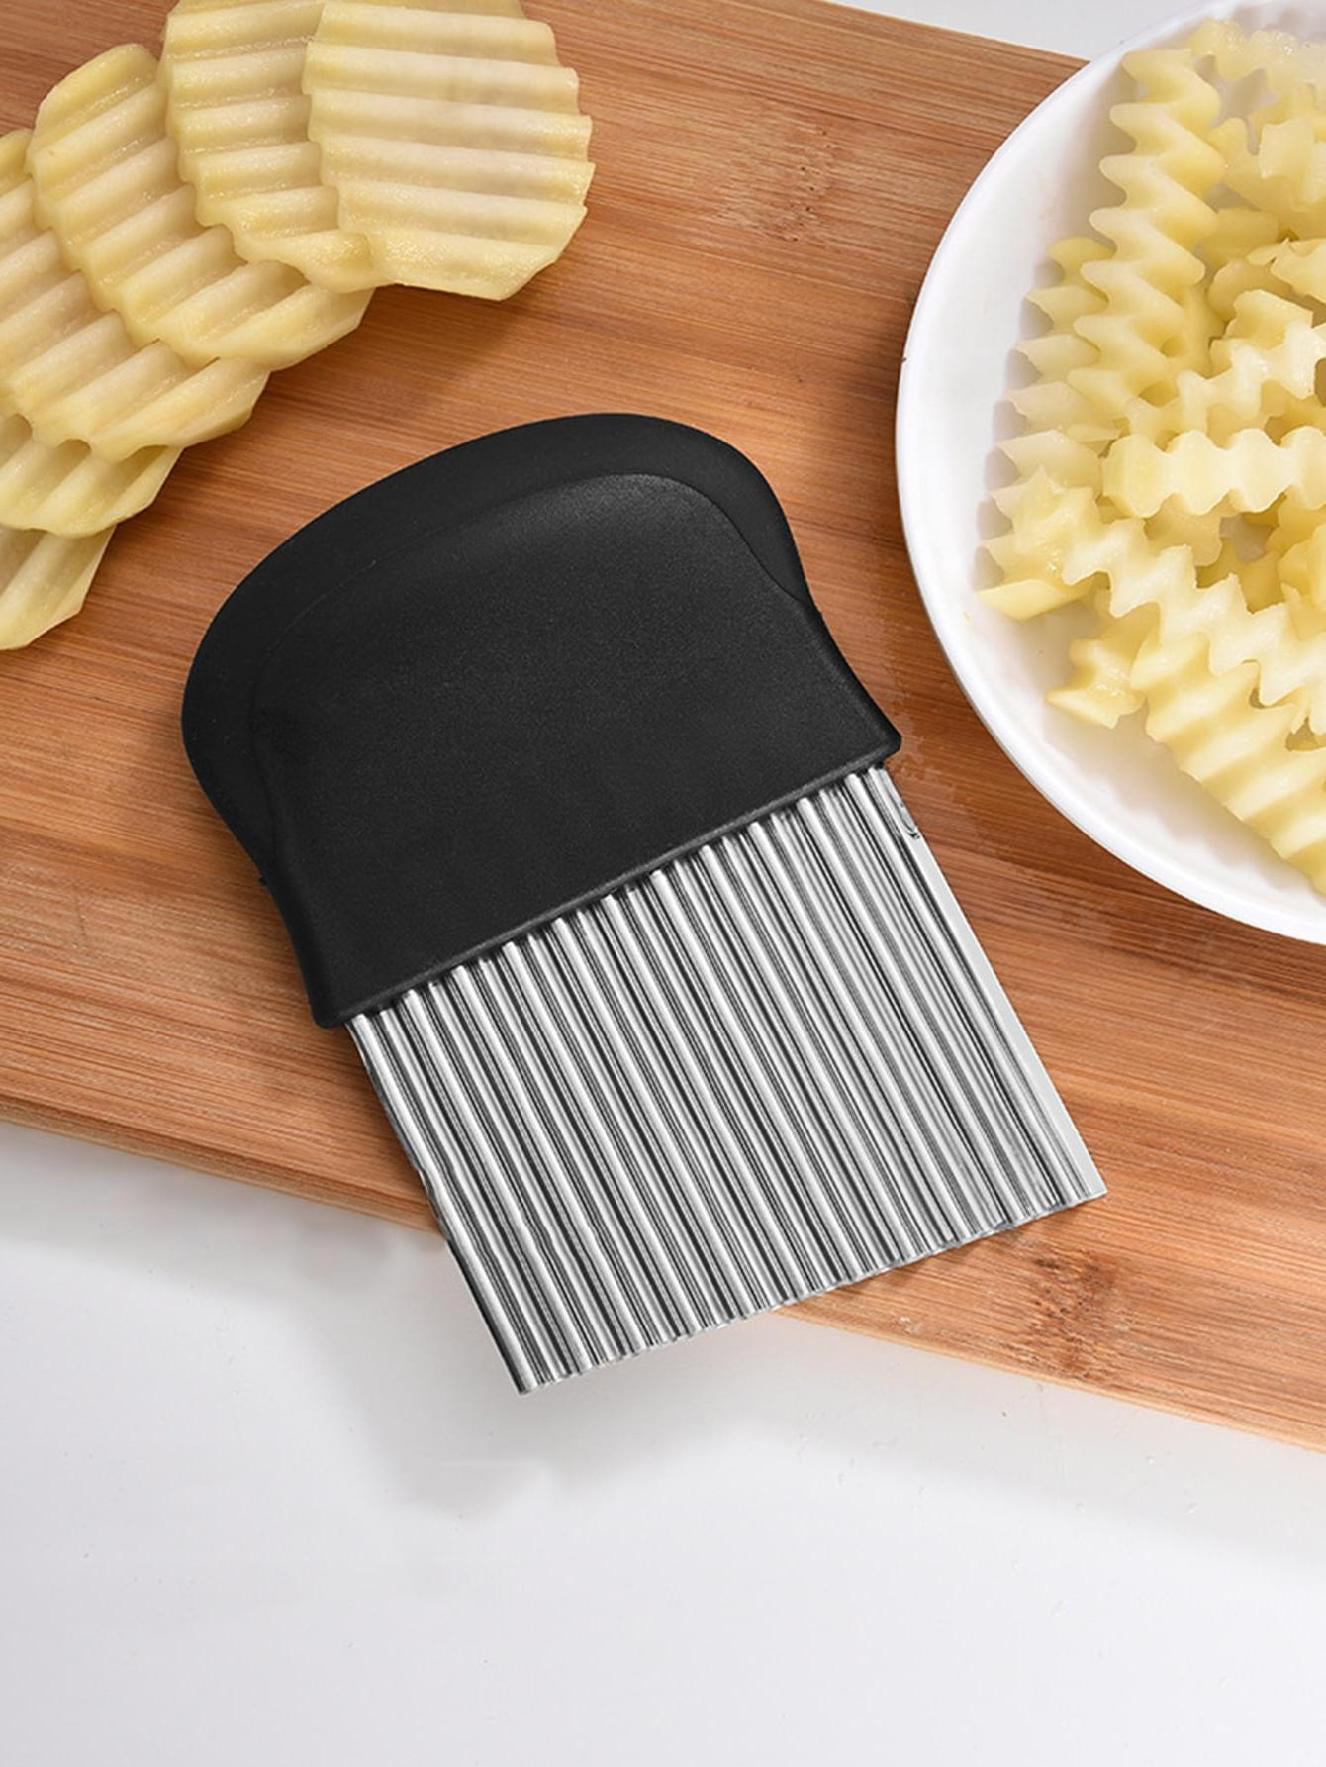 Fry Potato Cutter Slicer Stainless Steel Cut Waffle Slices Adjustable and  Manuel